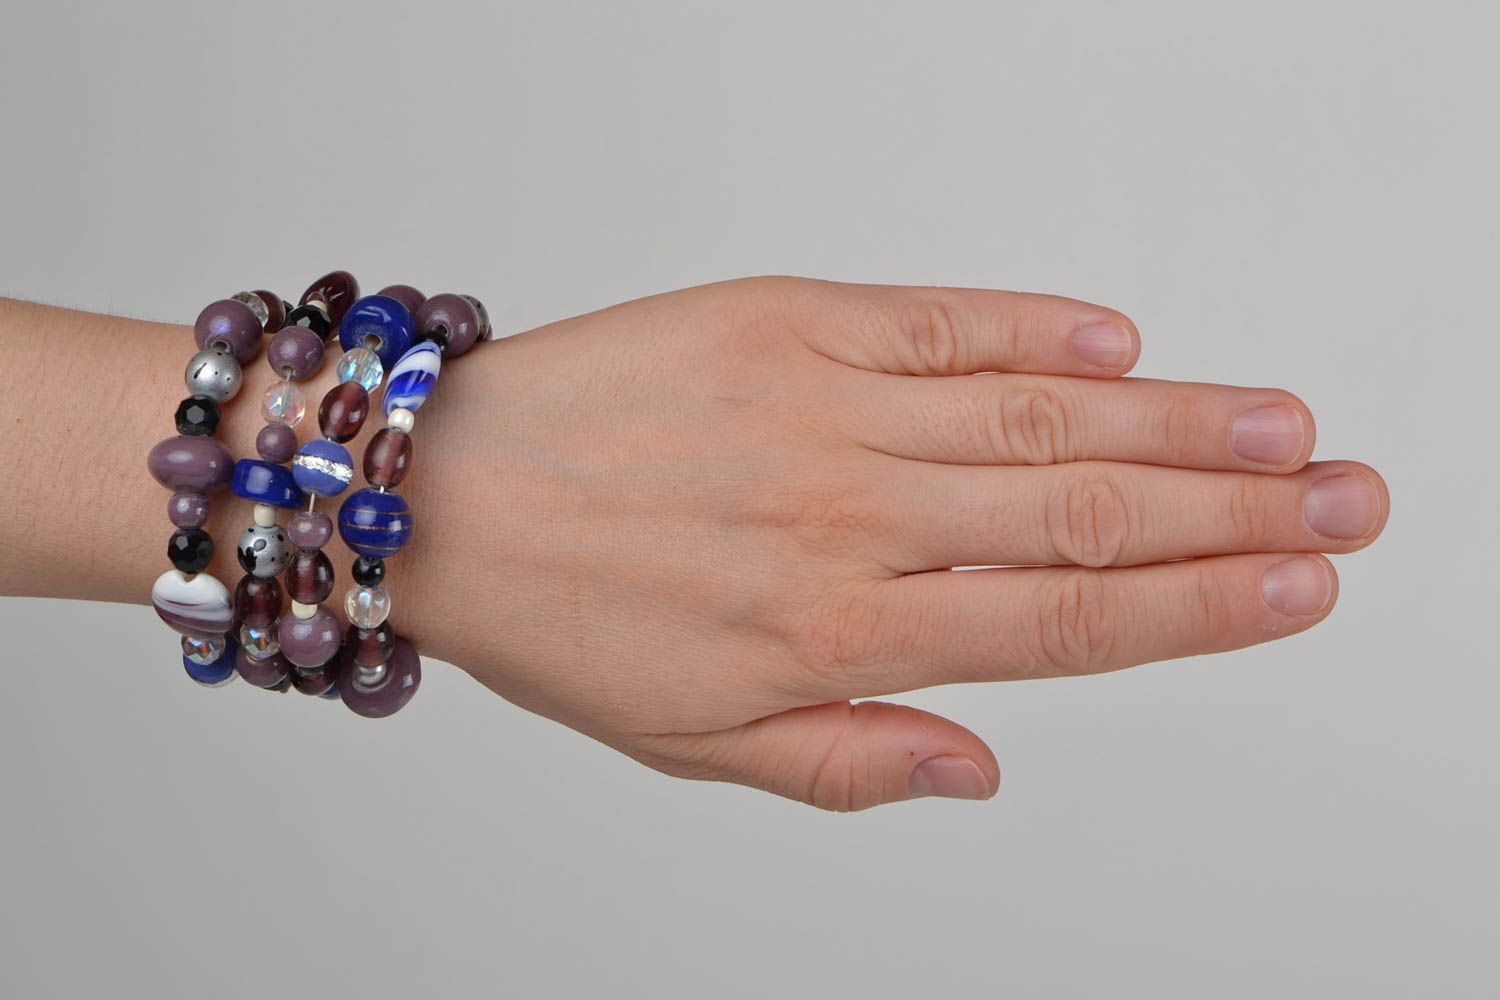 Handmade multi row wrist bracelet with glass beads in blue and violet colors photo 2